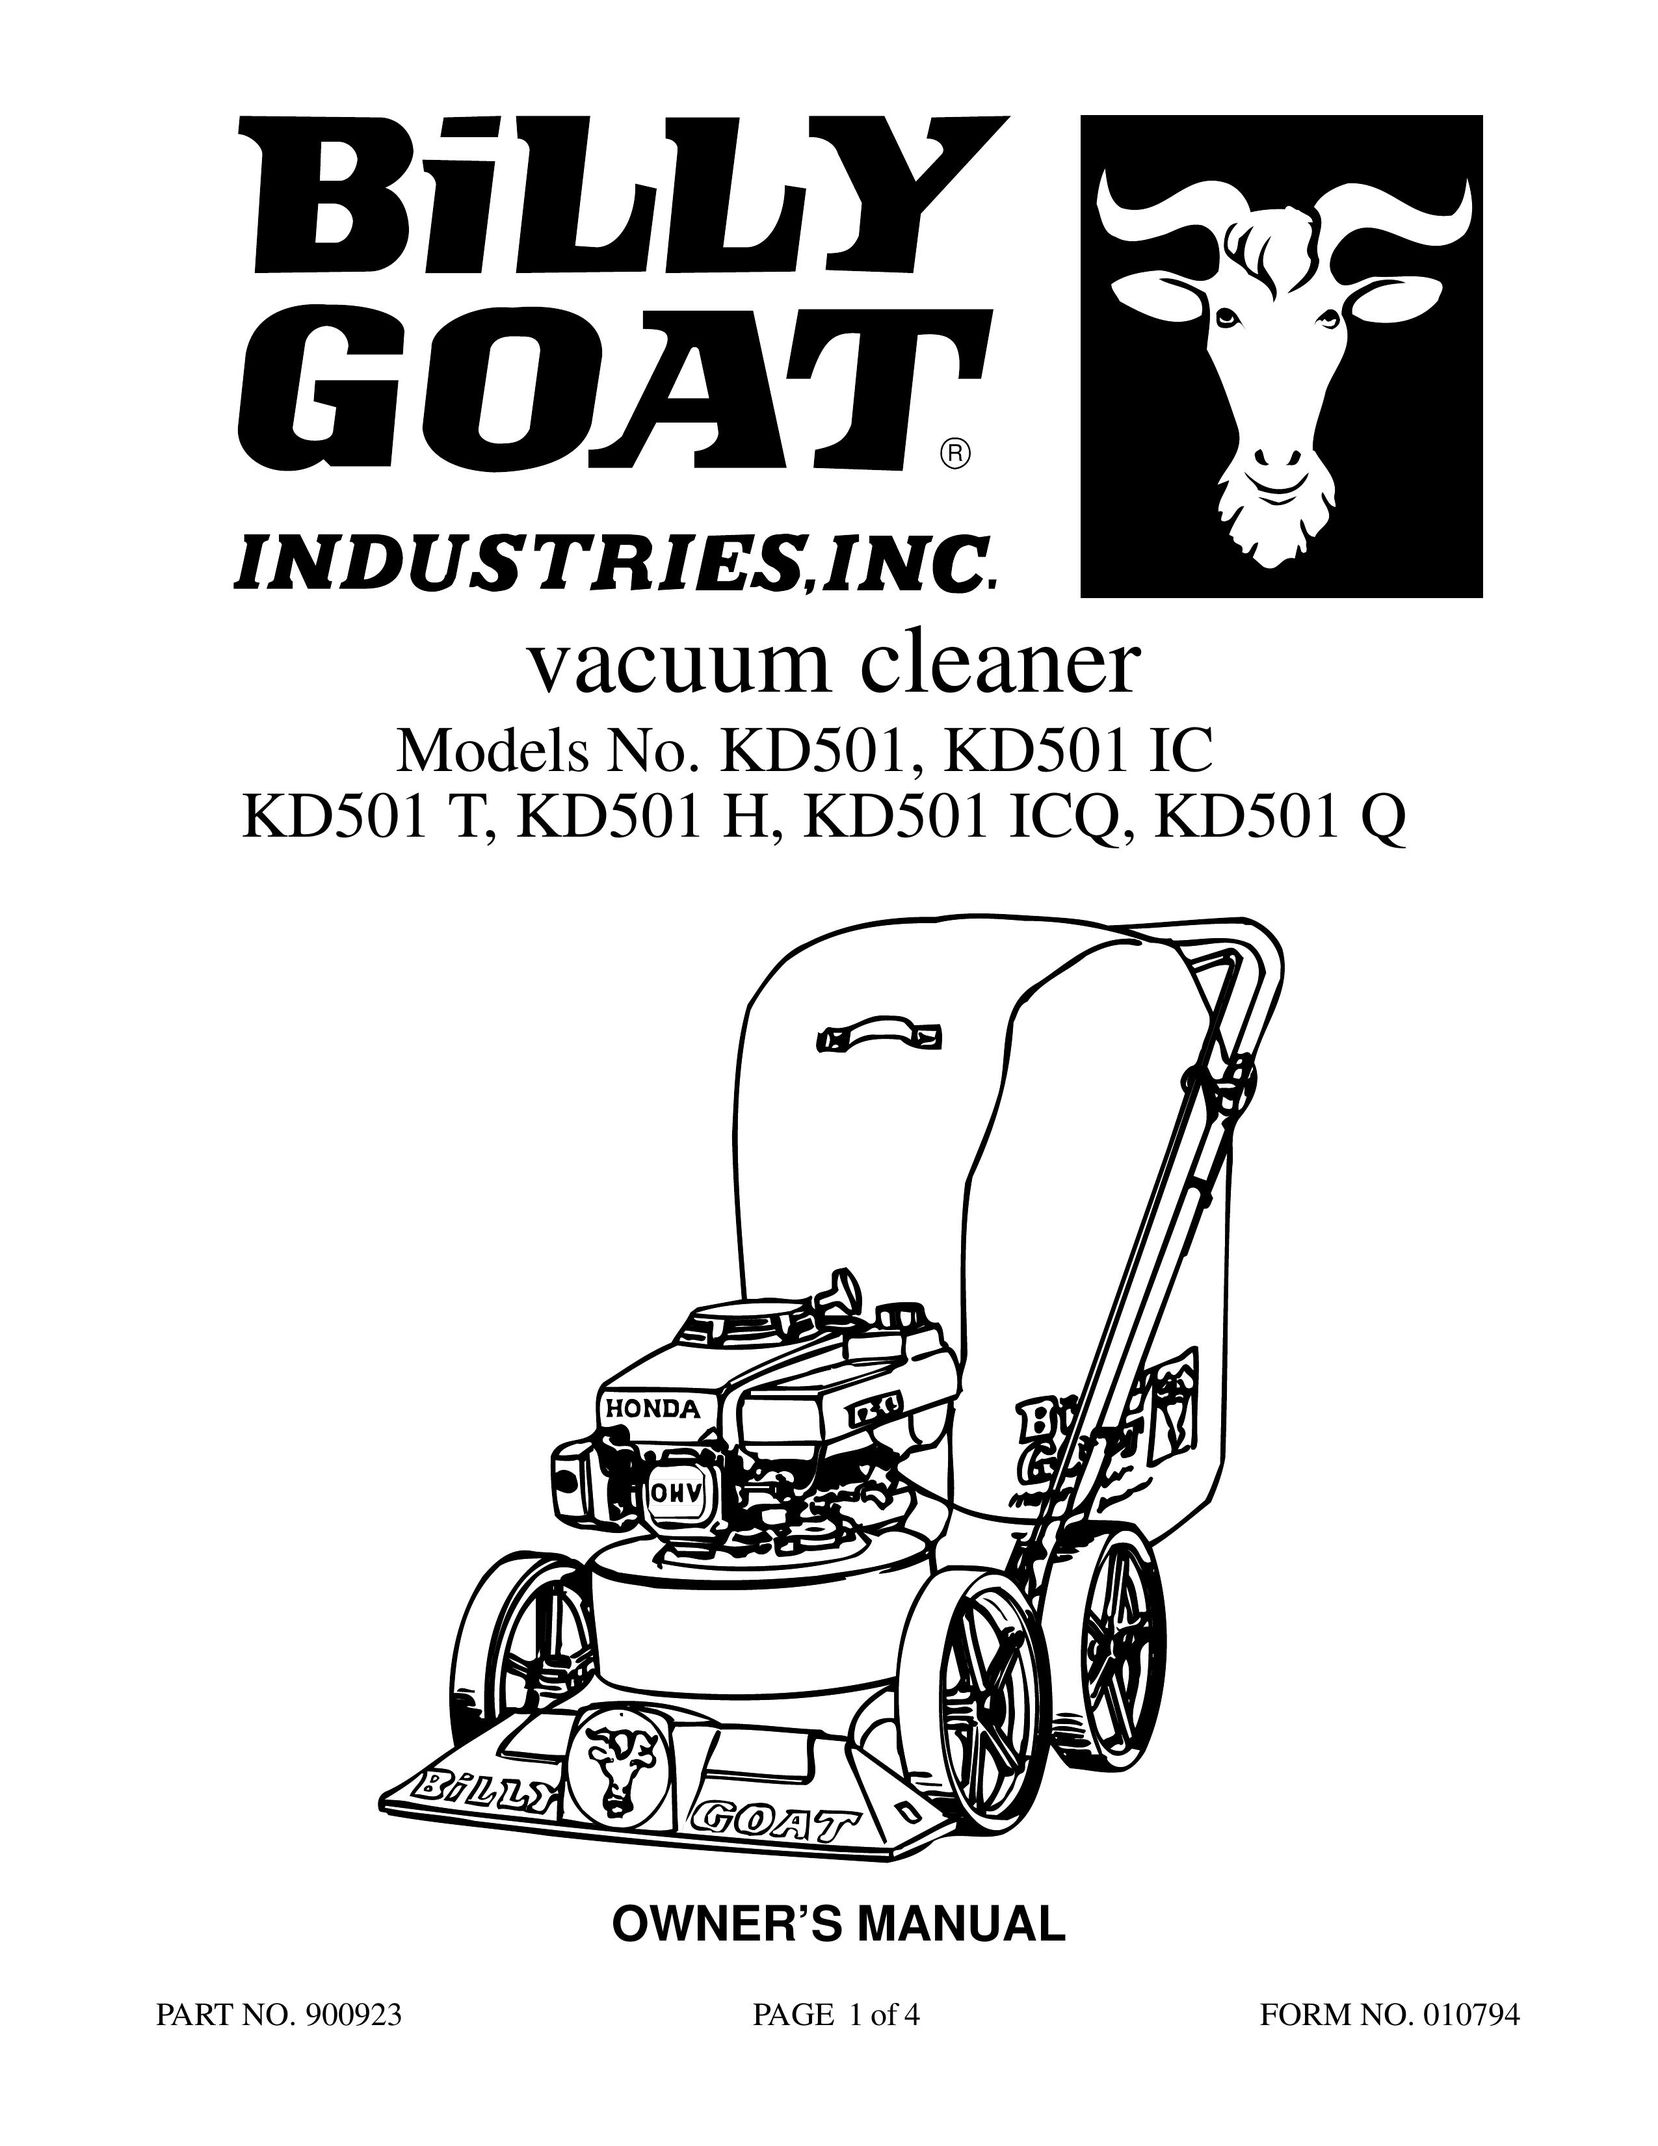 Billy Goat KD501 H Vacuum Cleaner User Manual (Page 1)